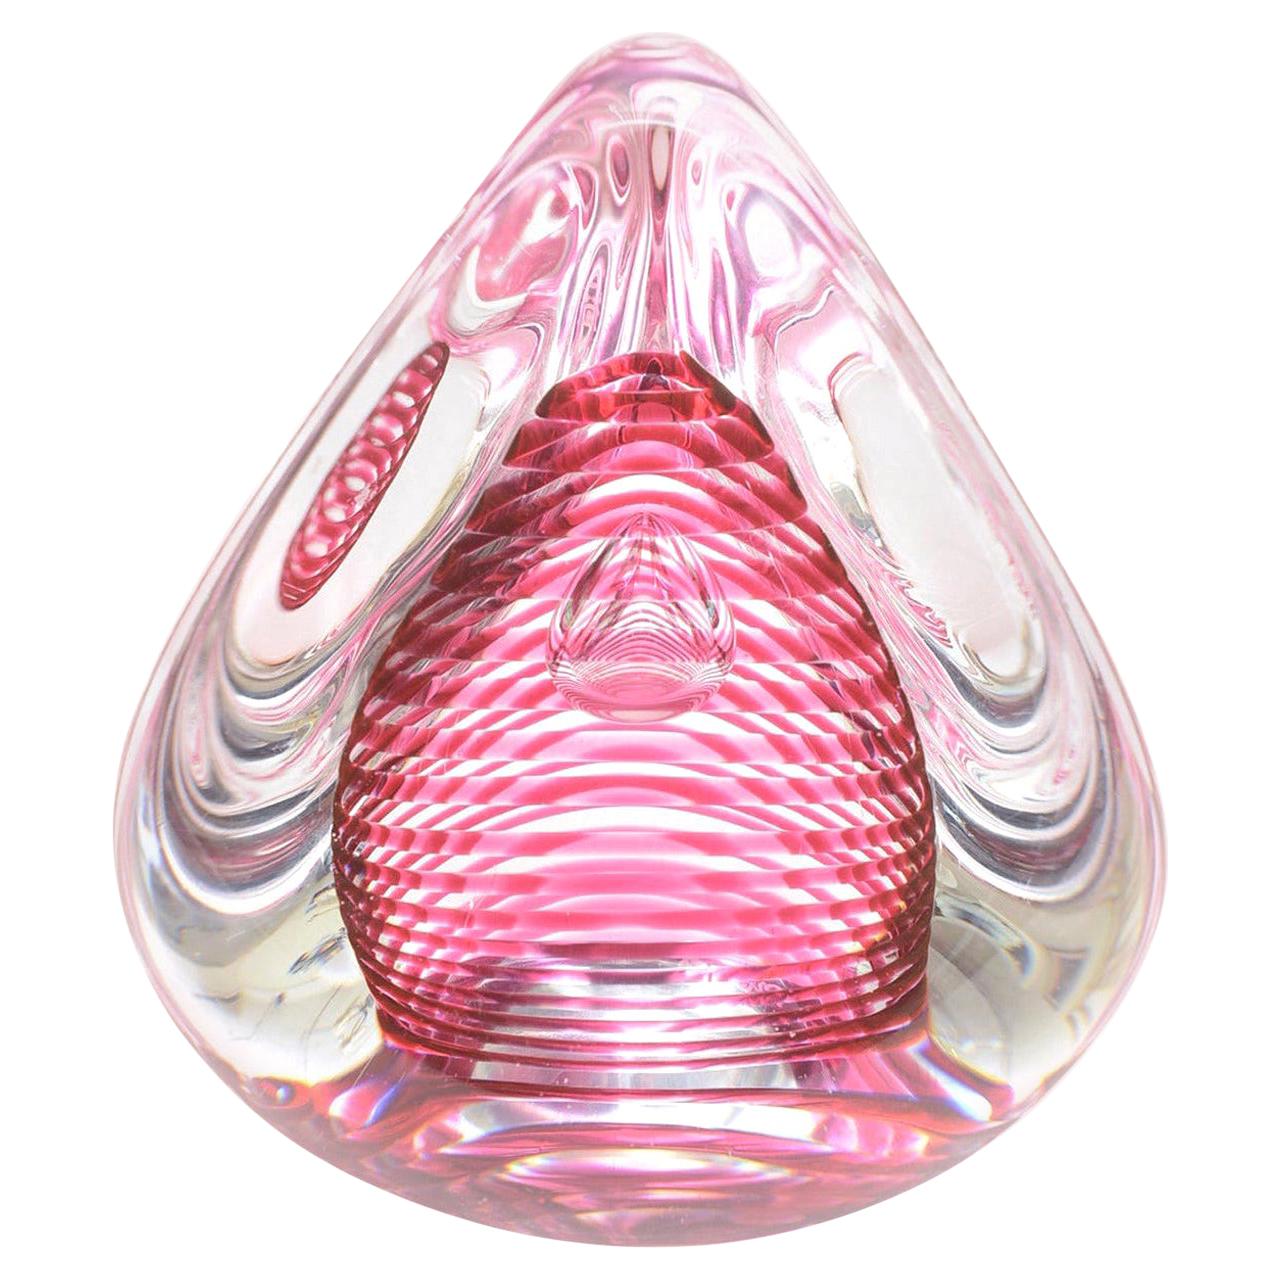 Optical Swedish Glass Paperweight or Object Signed Desk Accessory